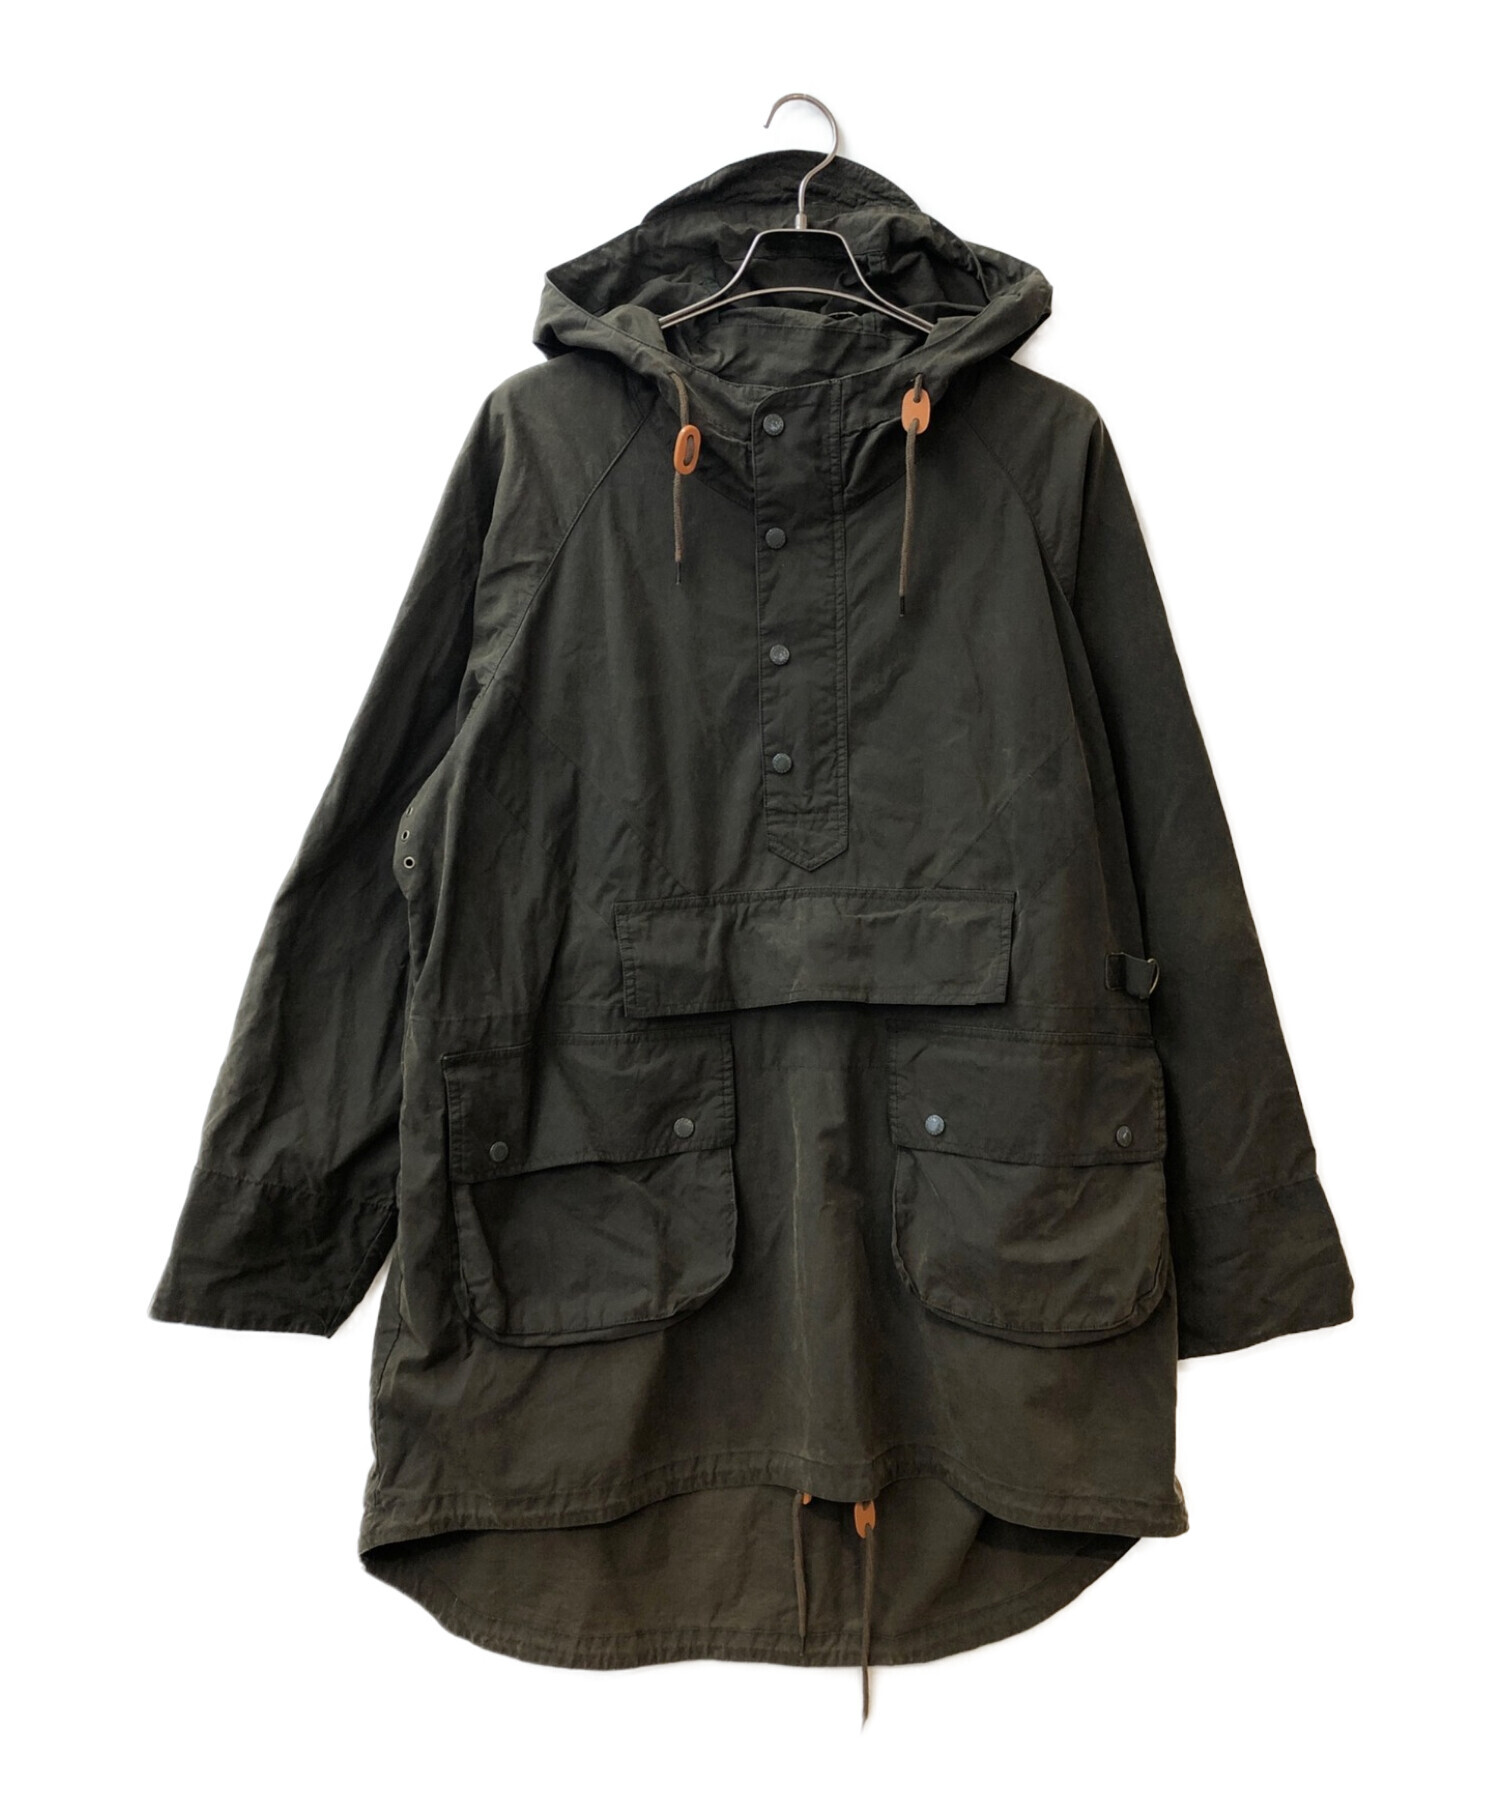 Barbour (バブアー) Engineered Garments (エンジニアードガーメンツ) Washed Warby Jacket グリーン  サイズ:Ｍ